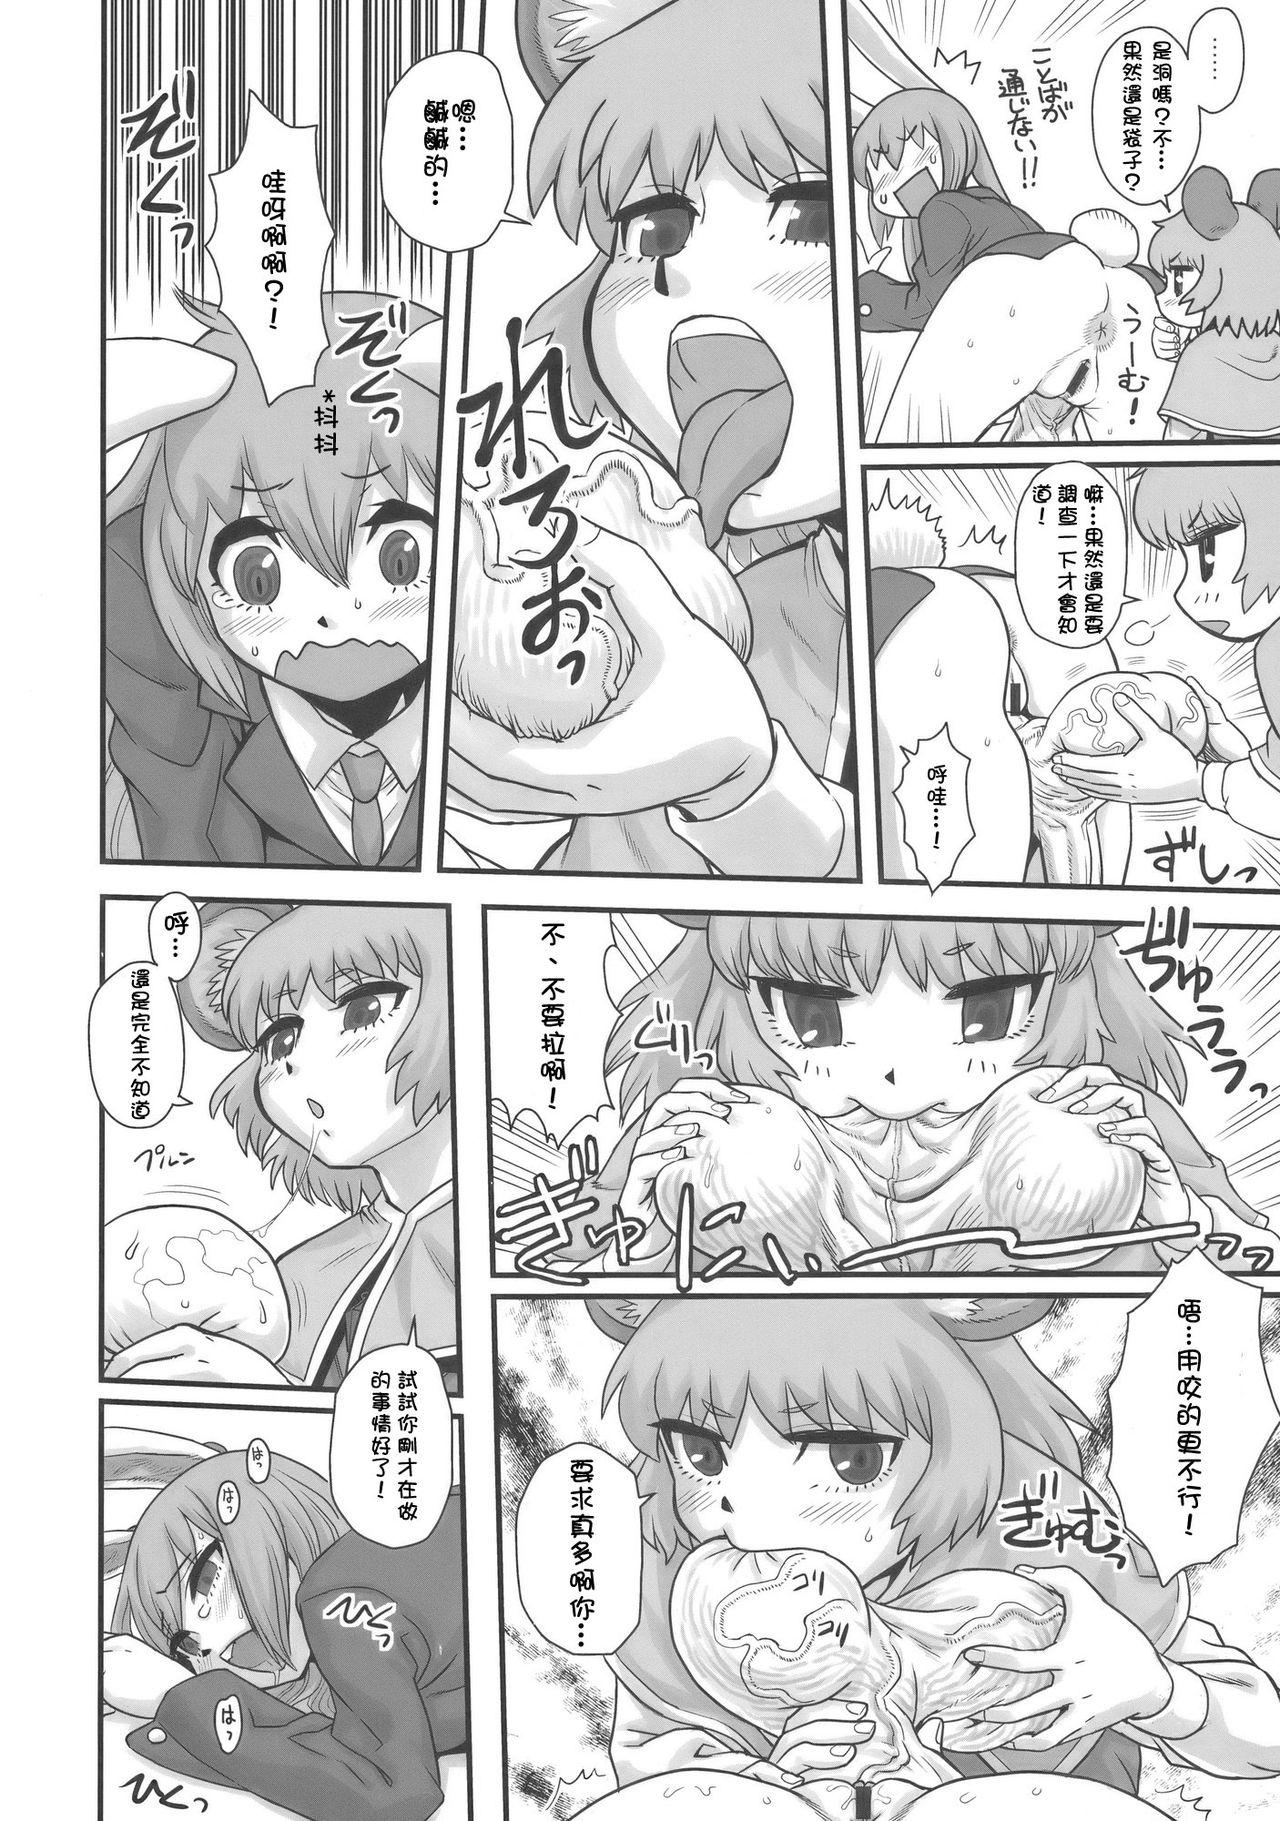 Bbc Lunatic Udon - Touhou project Solo Female - Page 8